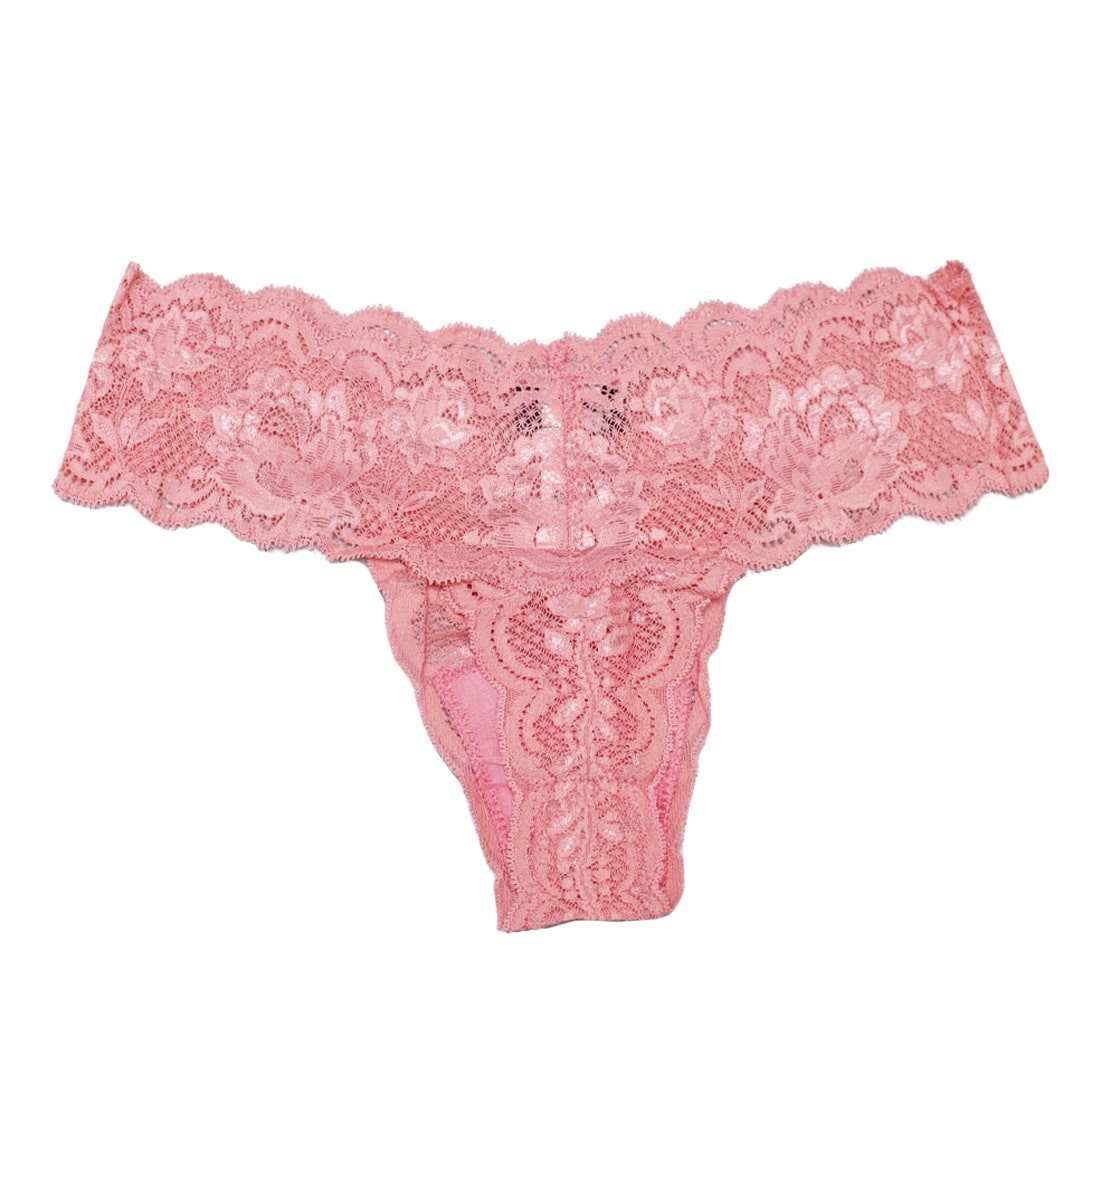 Cosabella Never Say Never Cutie Lowrider Thong (NEVER03ZL),Nuovo Mauve - Nuovo Mauve,One Size